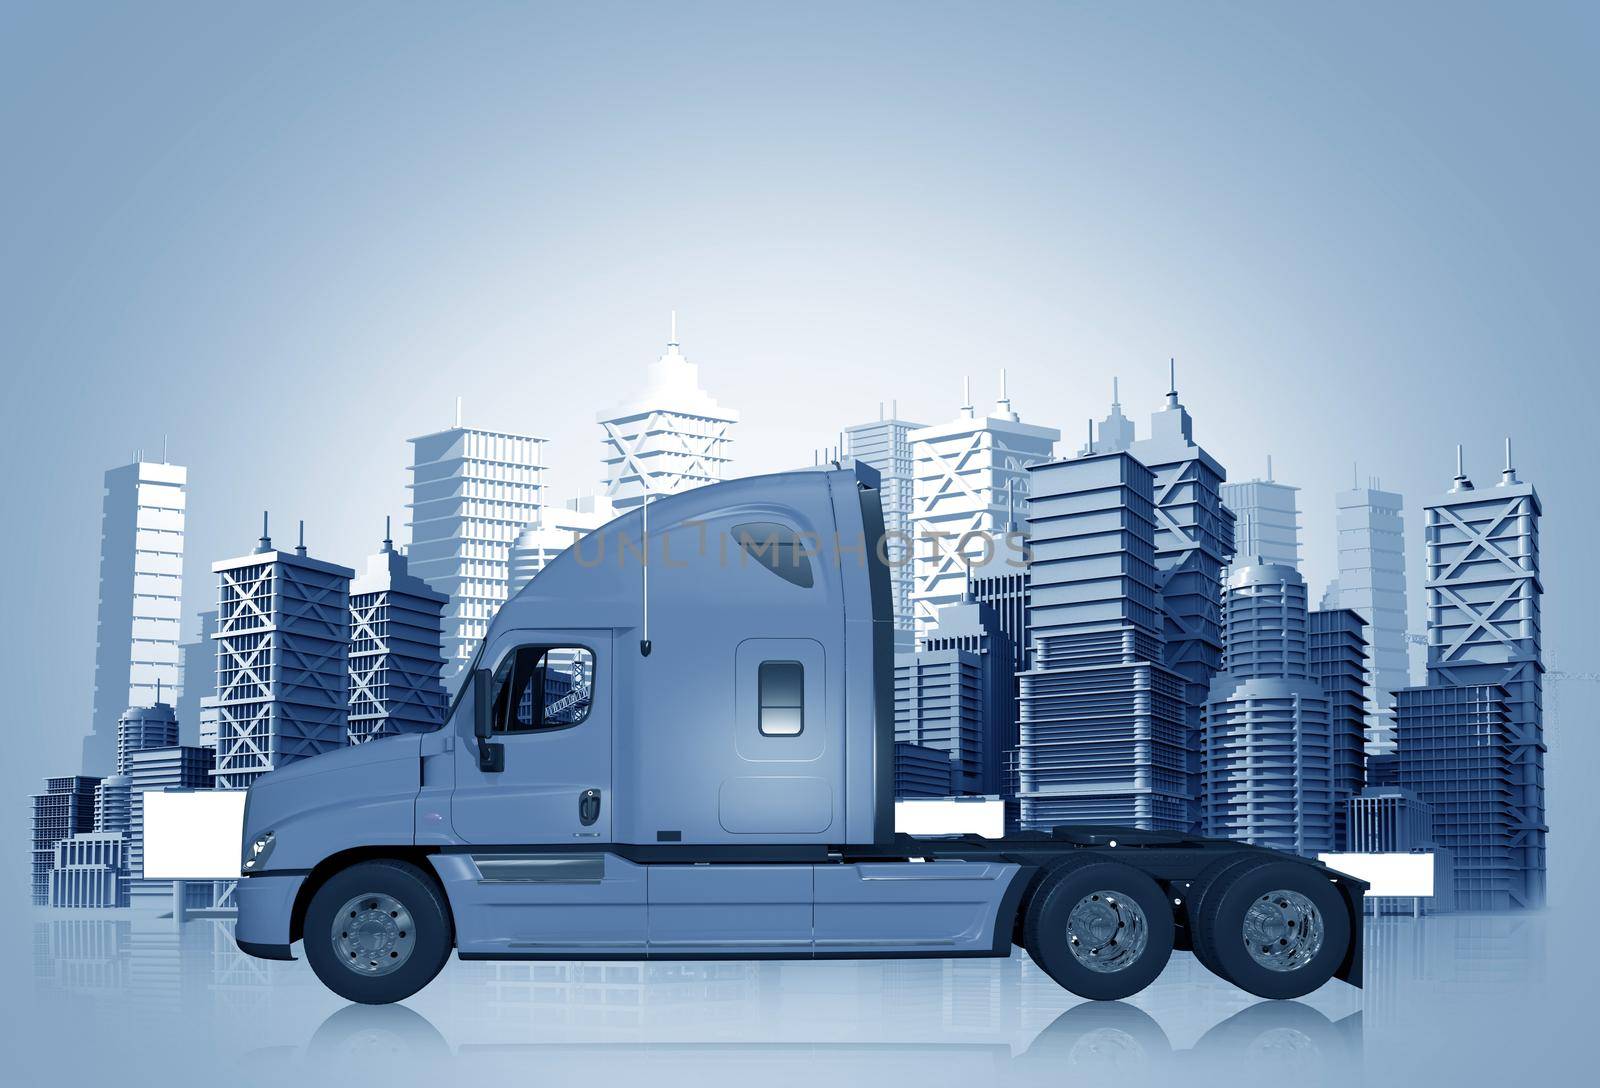 Truck and the City Skyline in Blue Color Tones. Trucking Concept Illustration.